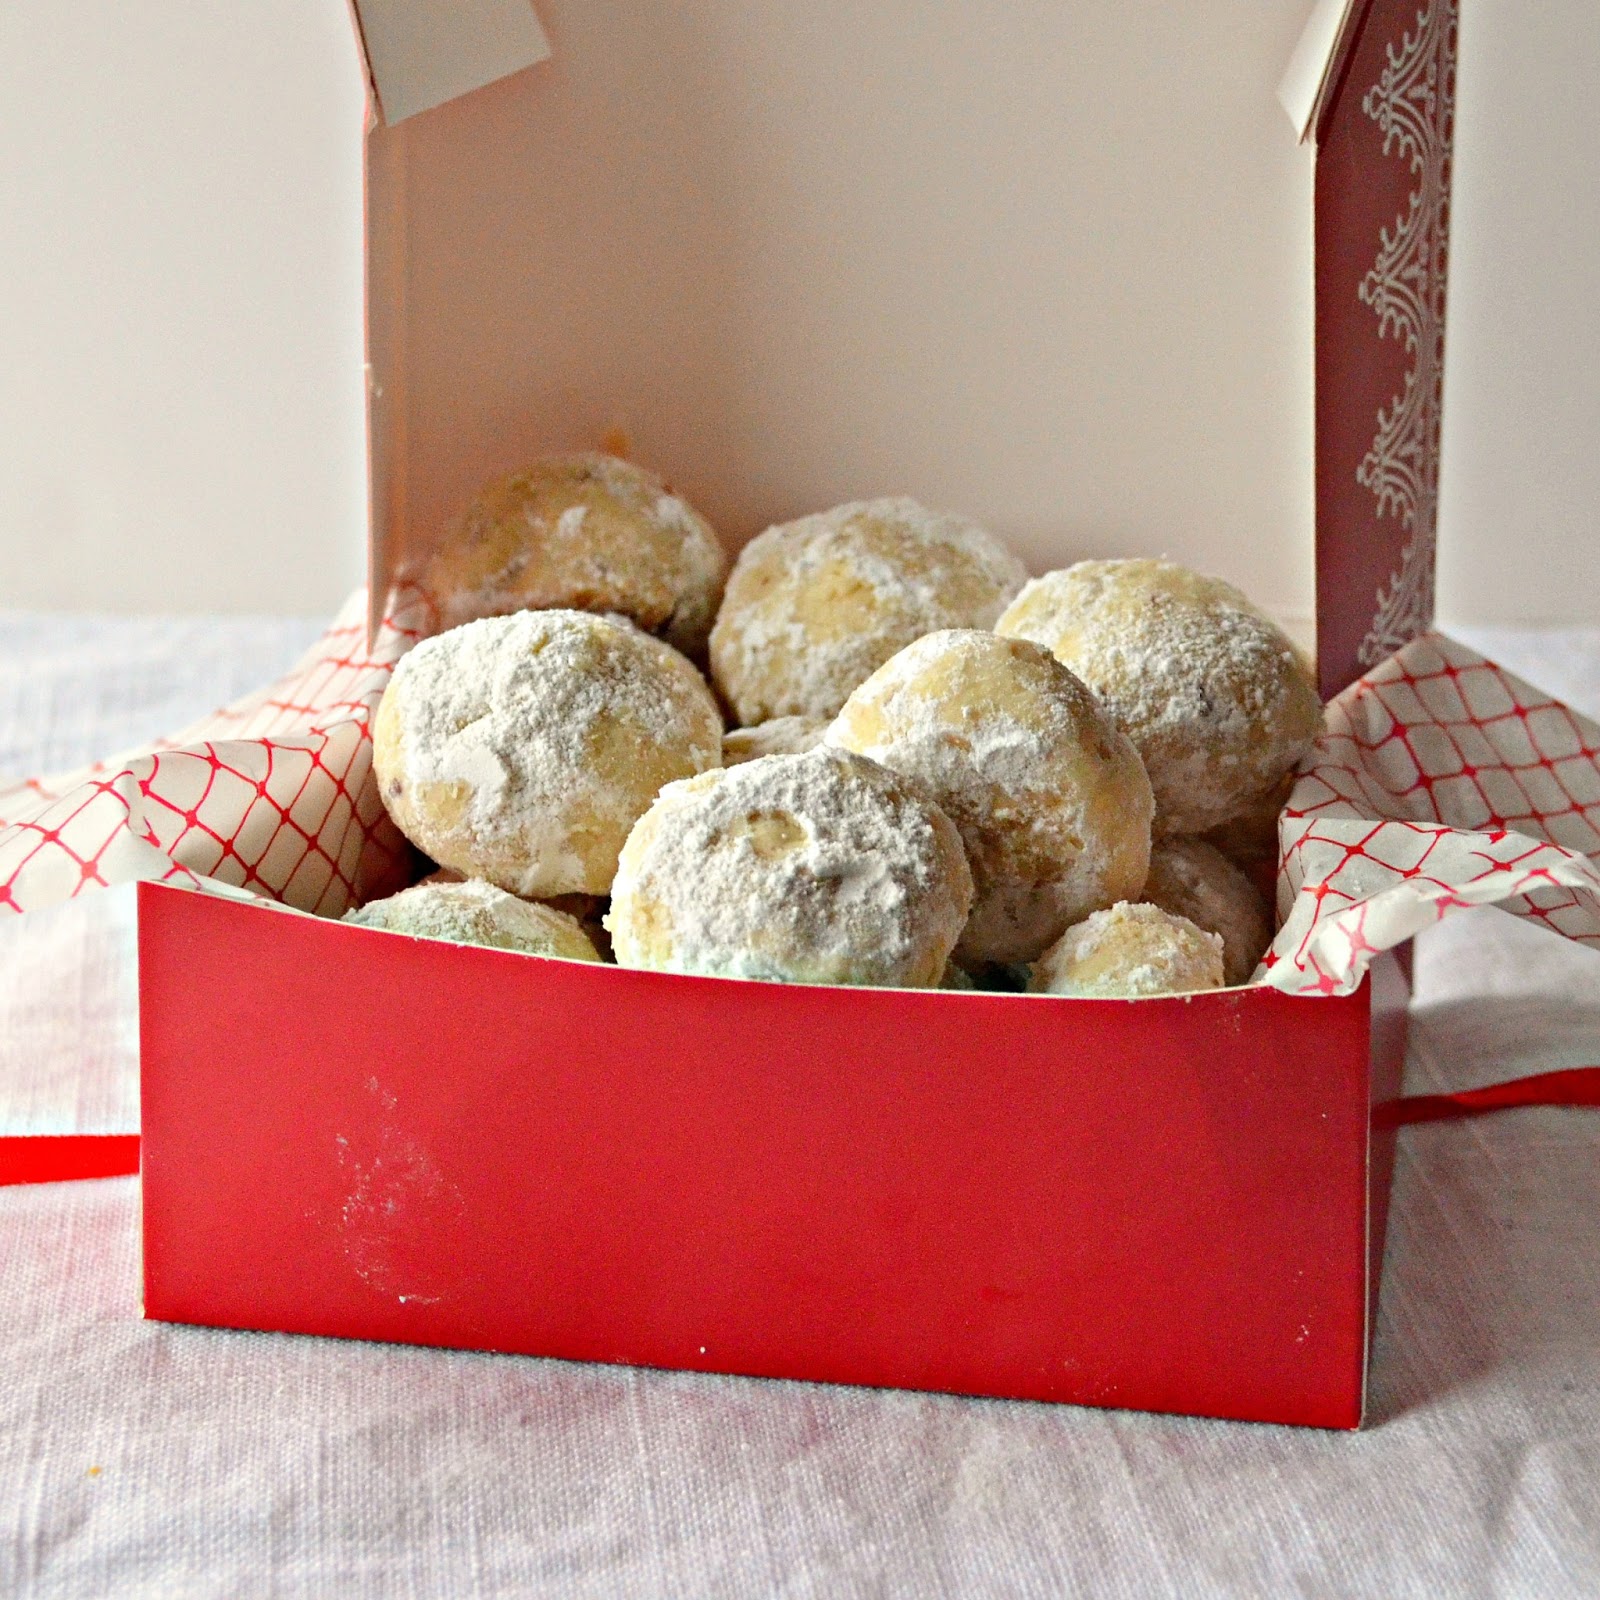 25 Last Minute Christmas Cookie Ideas. Russian Tea Cakes. serenabakessimplyfromscratch.com